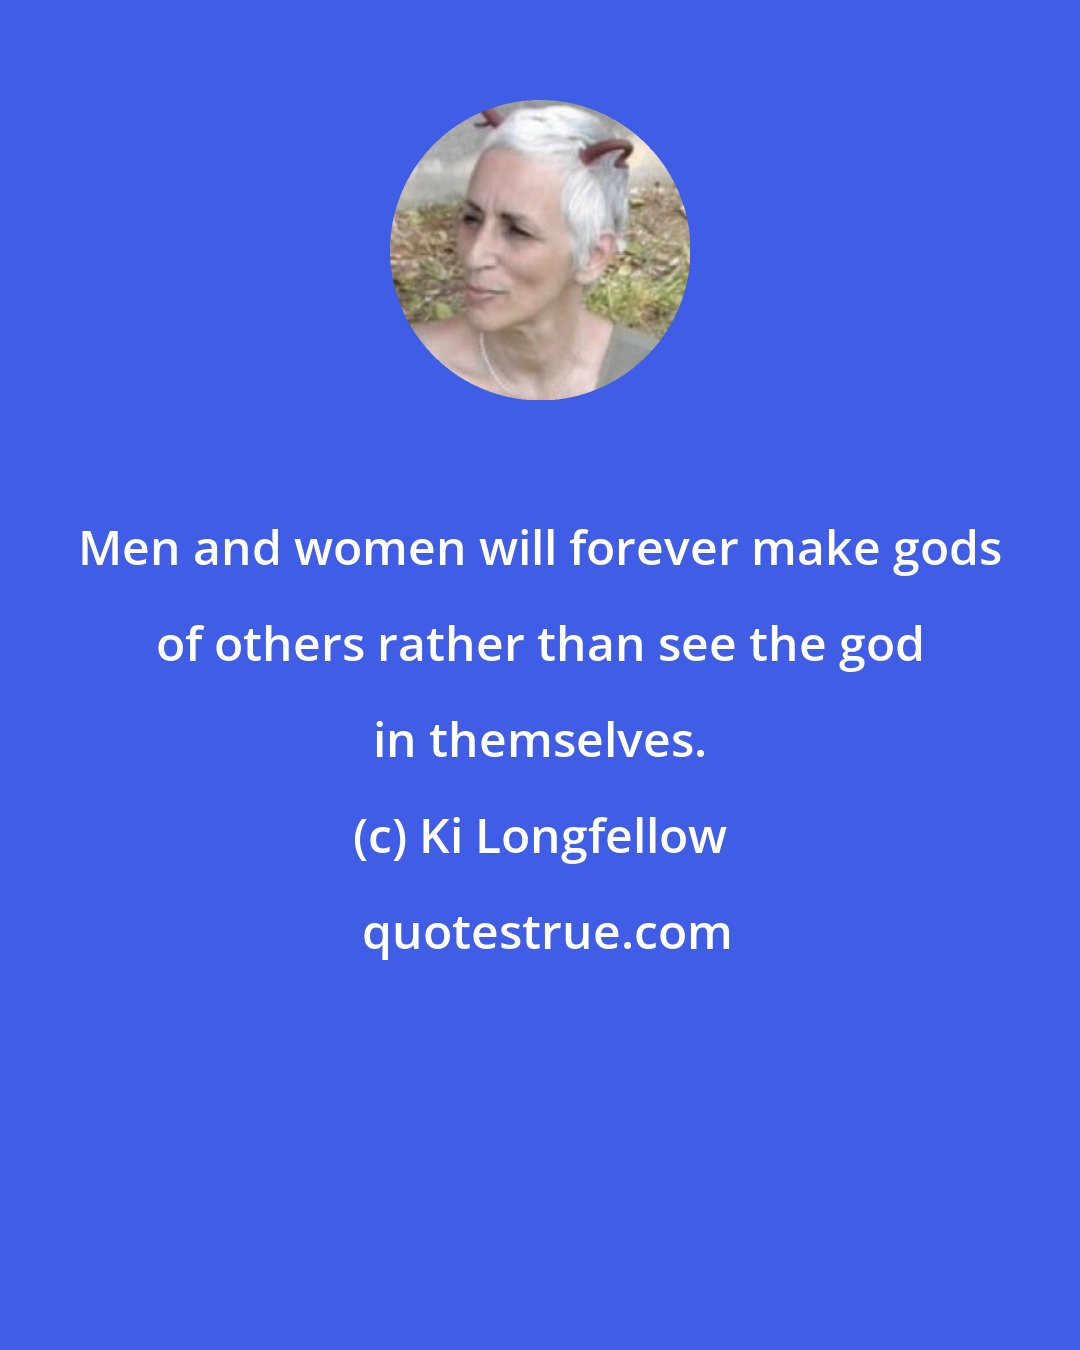 Ki Longfellow: Men and women will forever make gods of others rather than see the god in themselves.